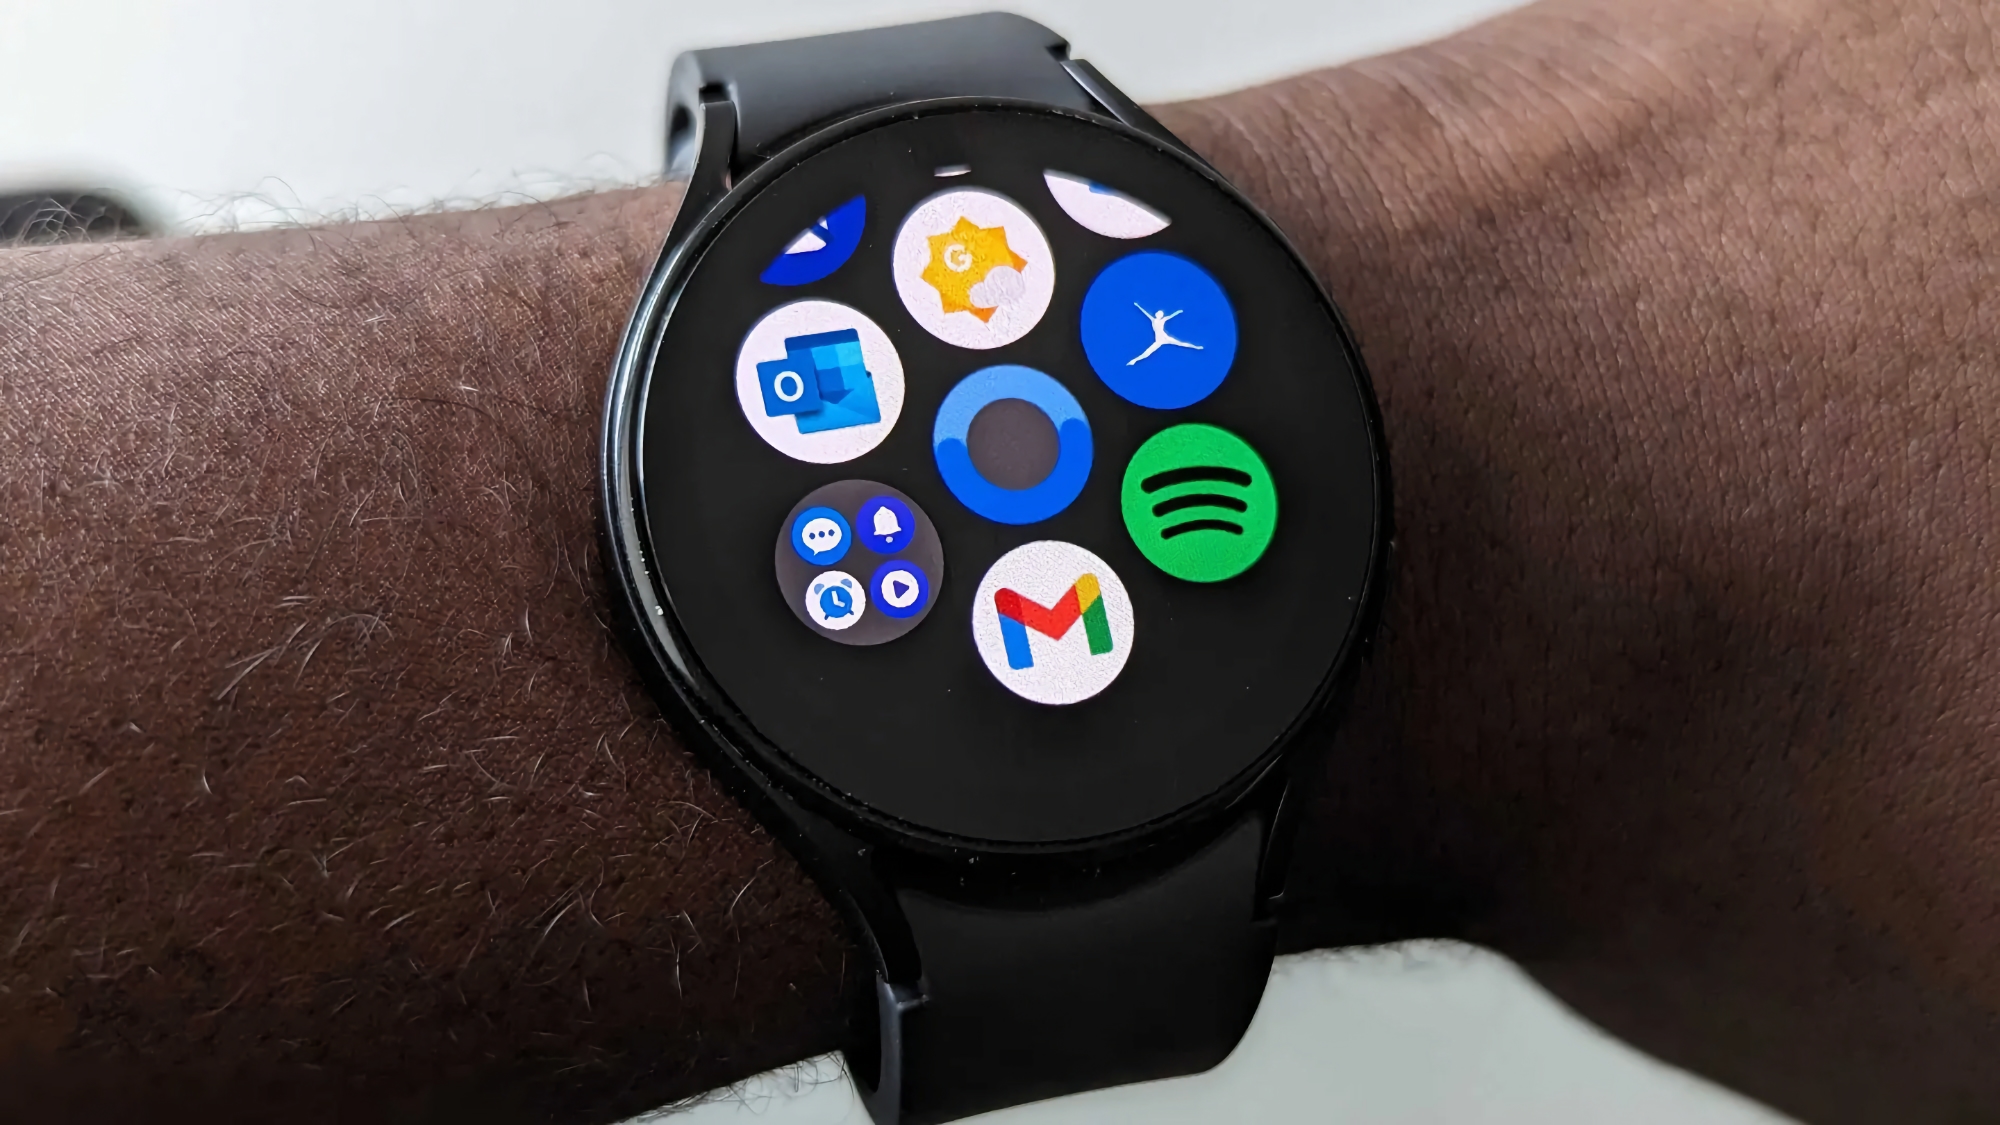 Google has unveiled the Gmail app for Wear OS-based smart watches